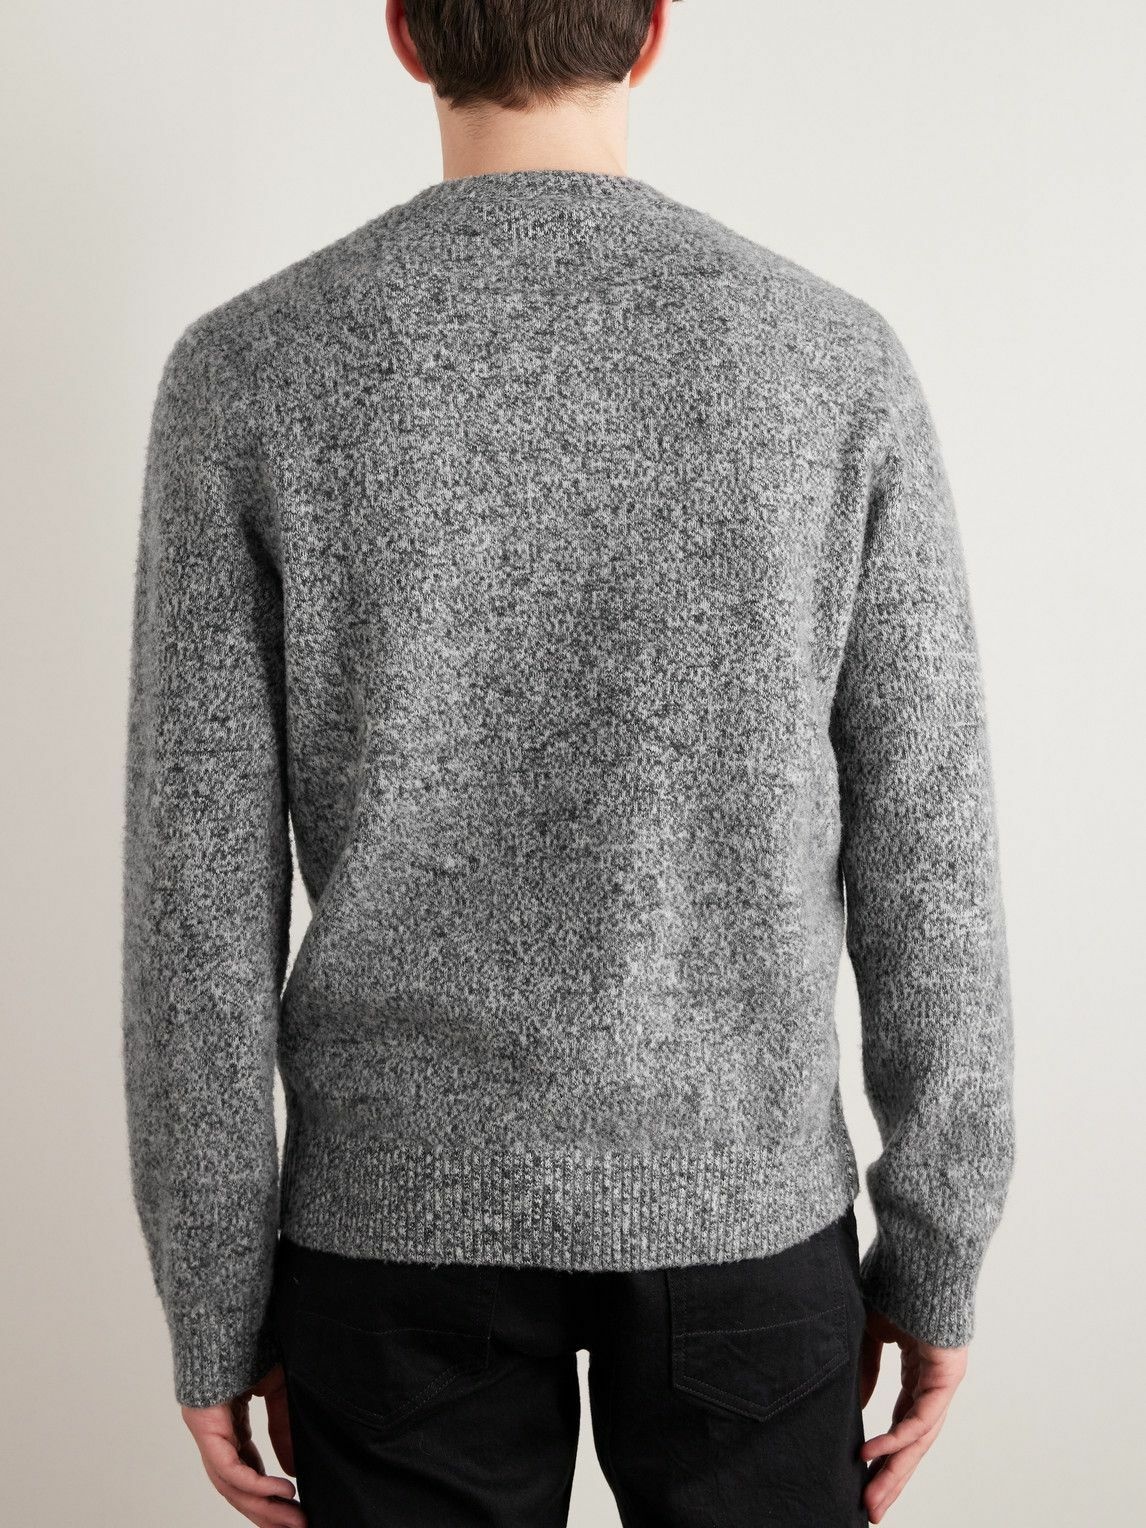 Dunhill - Wool-Blend Sweater - Gray Dunhill